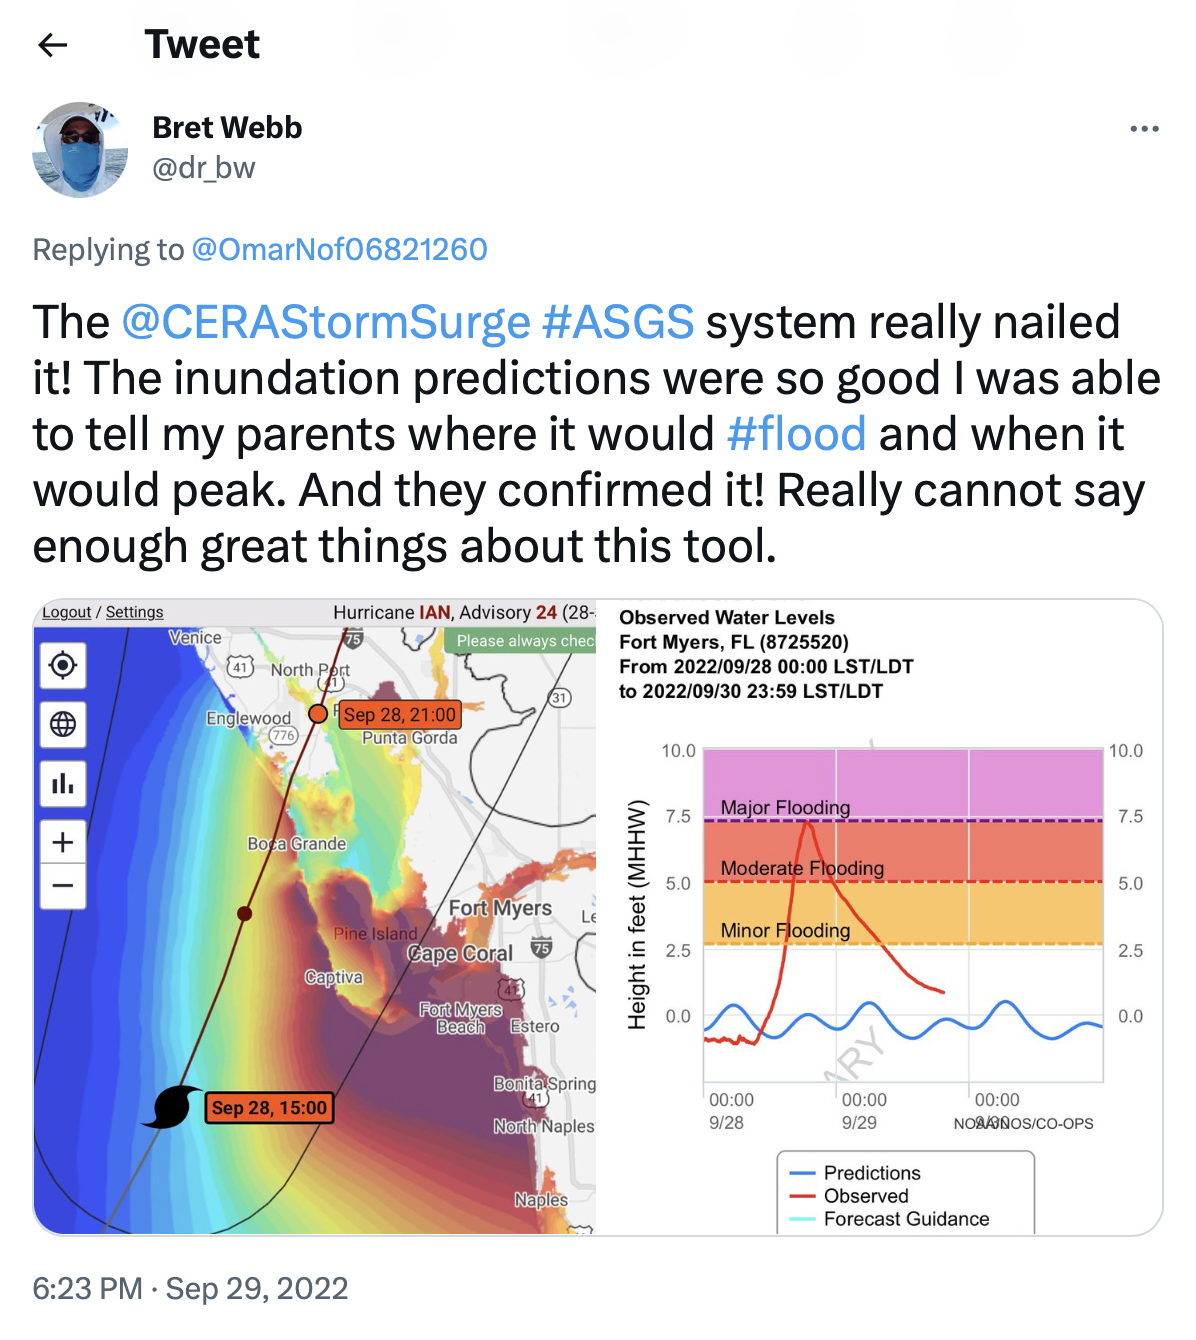 Tweet by @dr_bw: The @CERAStormSurge #ASGS system really nailed it! The inundation predictions were so good I was able to tell my parents where it would #flood and when it would peak. And they confirmed it! Really cannot say enough great things about this tool.